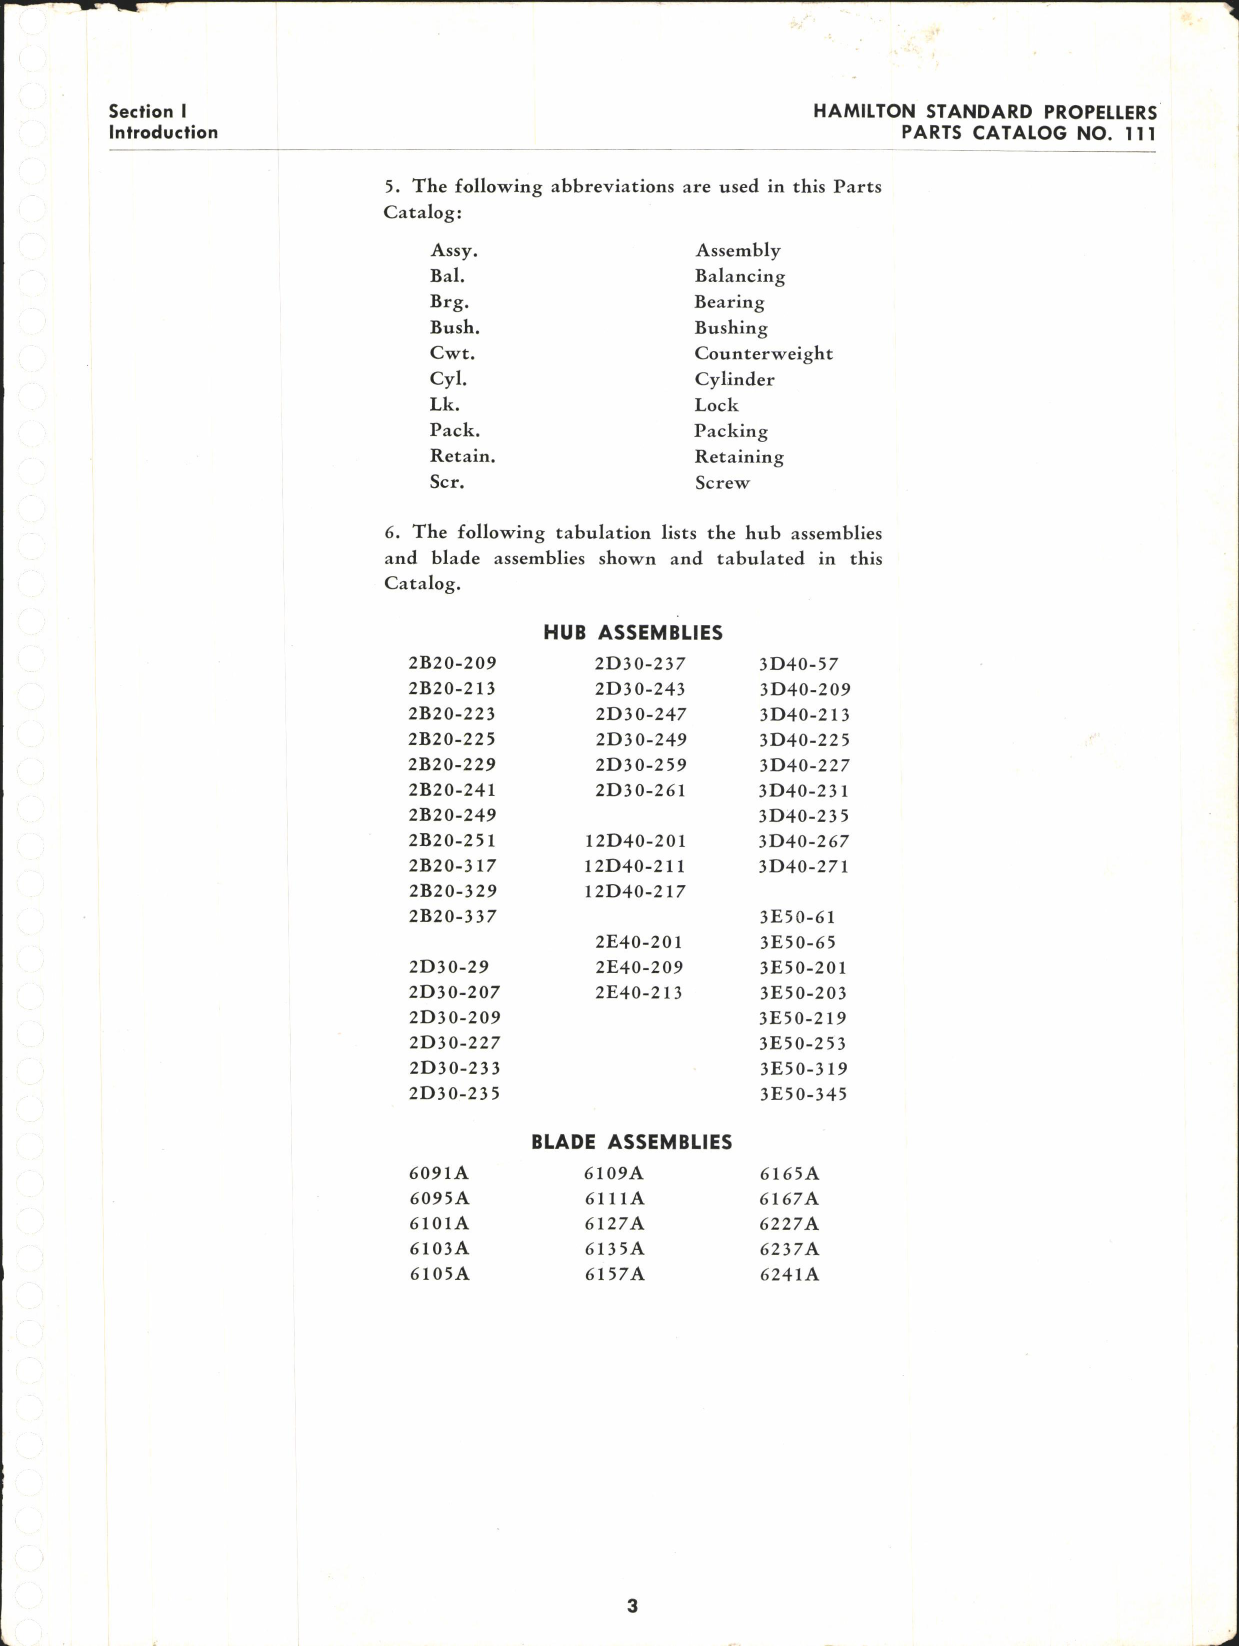 Sample page 7 from AirCorps Library document: Parts Catalog for Counterweight Propellers